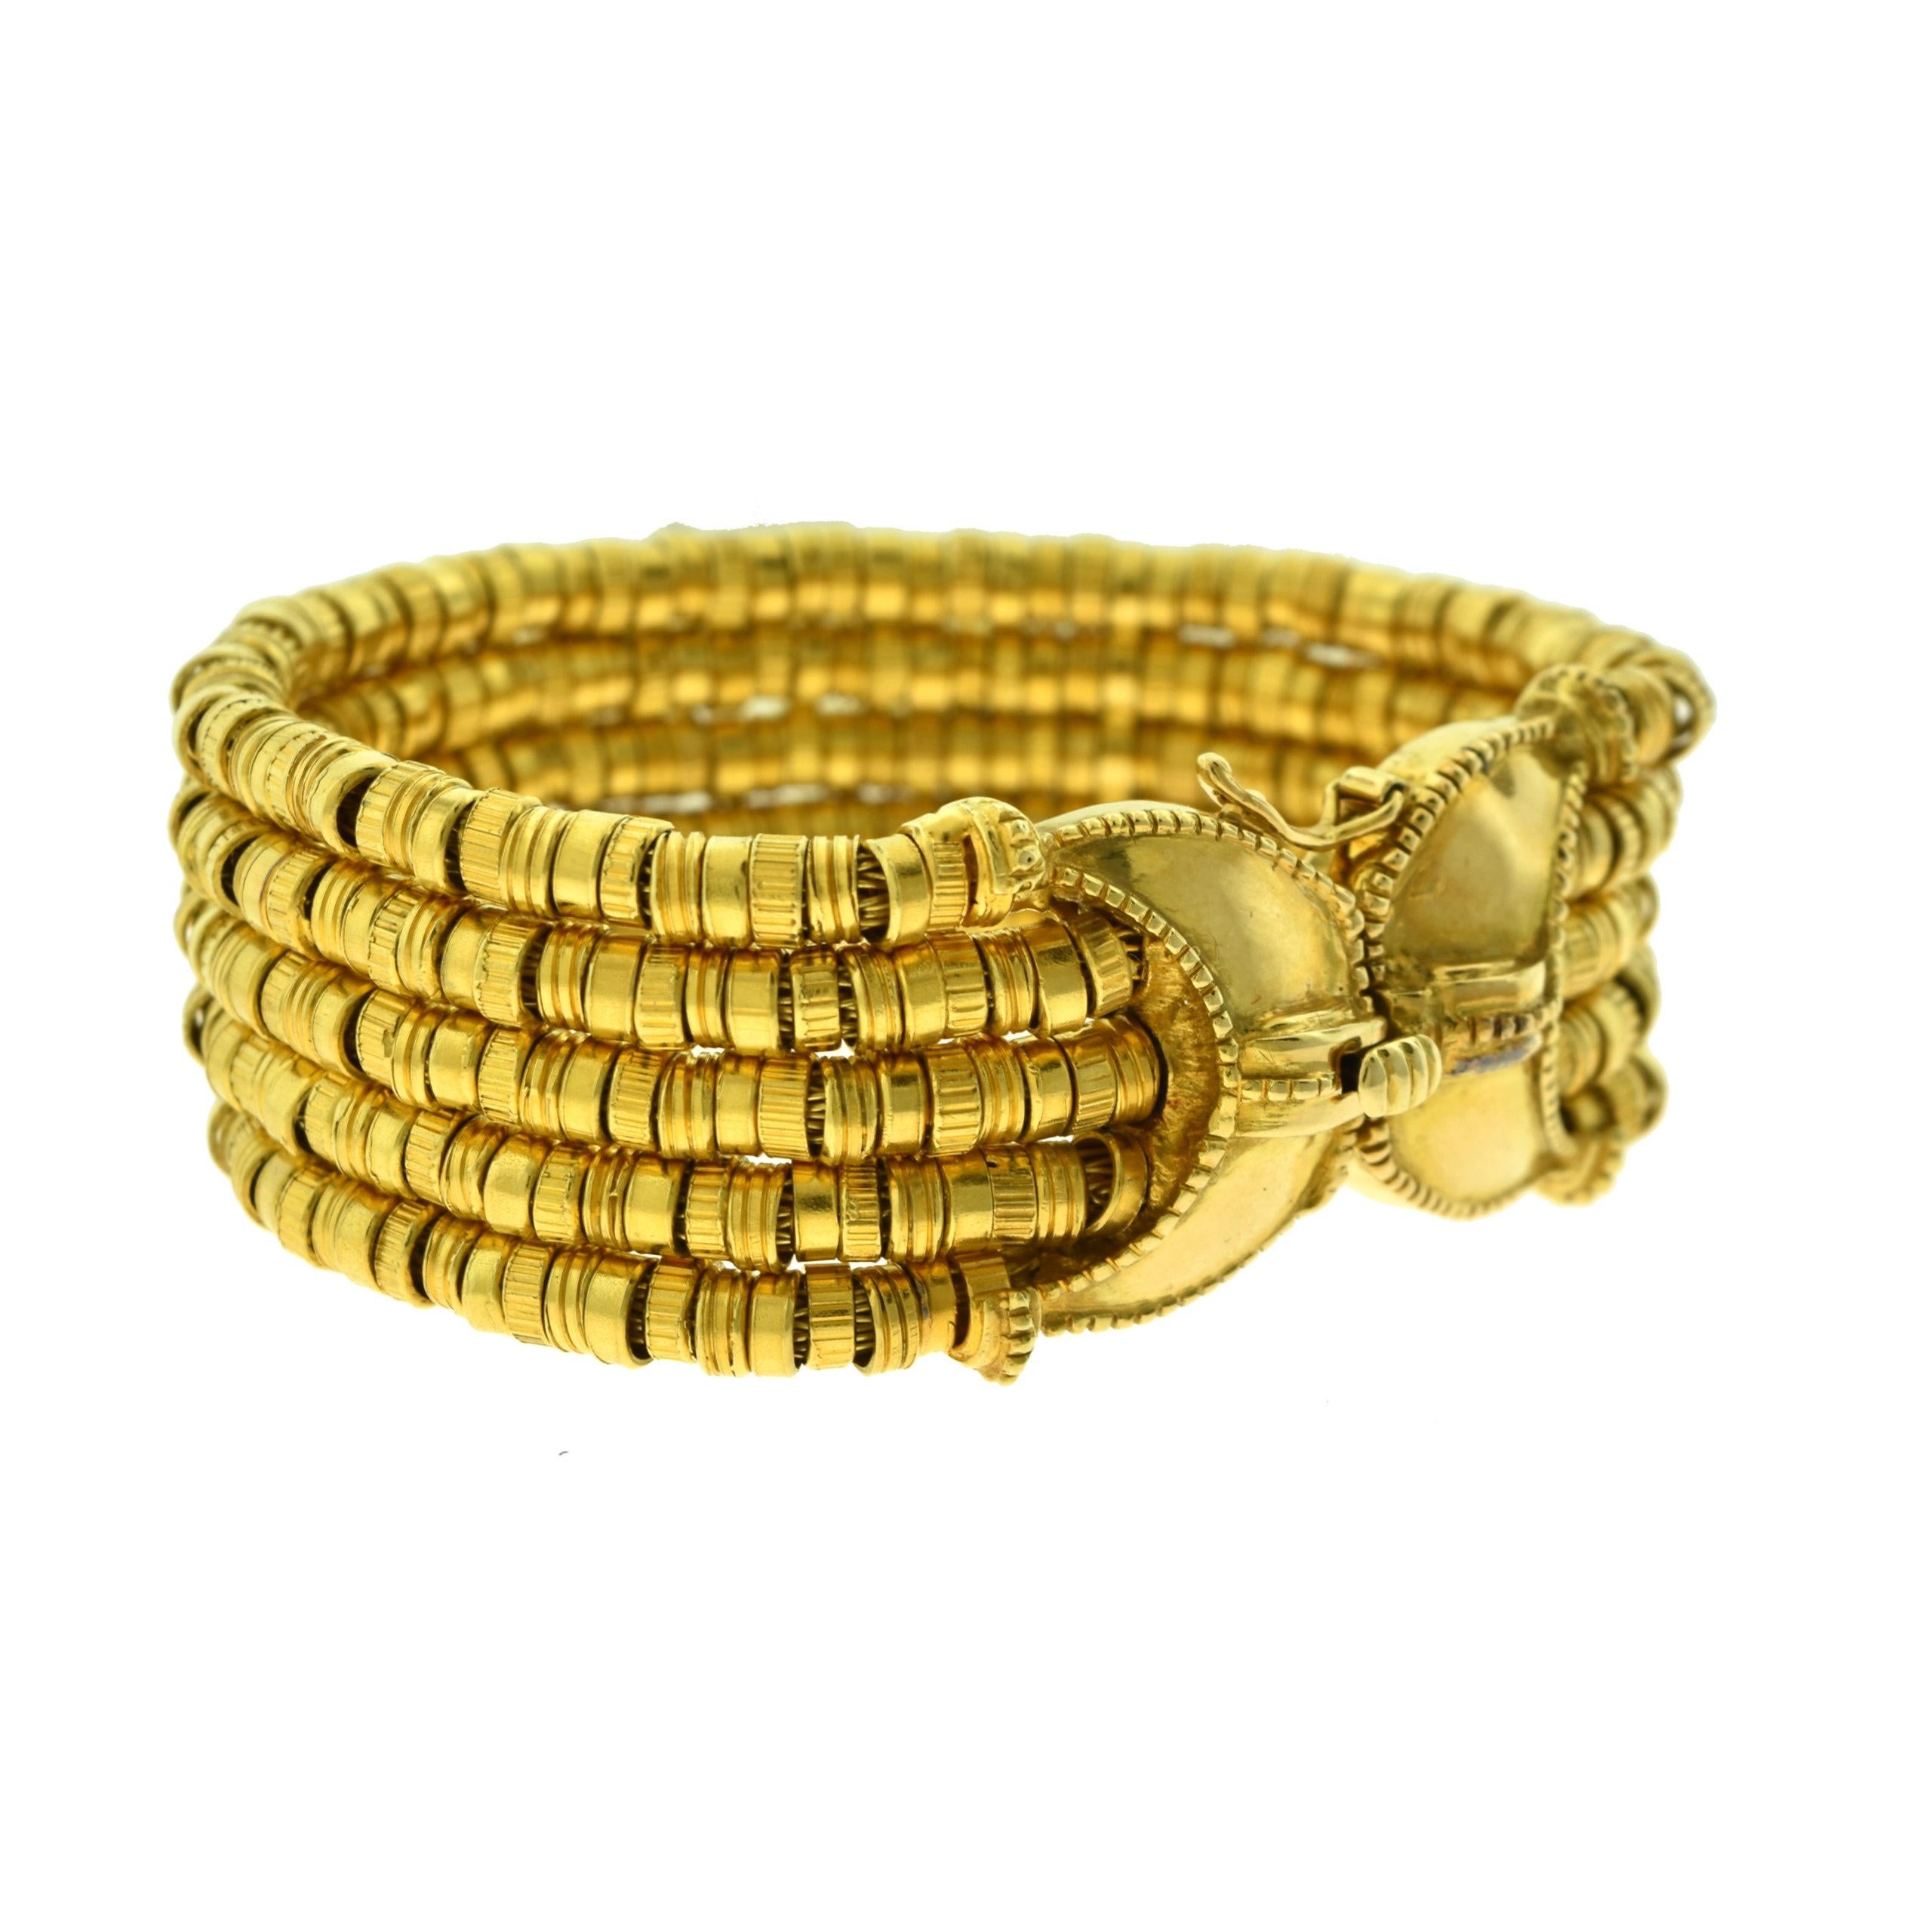 Brilliance Jewels, Miami
Questions? Call Us Anytime!
786,482,8100

Designer: ILIAS LALAOUNIS

Collection: Helen of Troy

Style: Textured Bracelet 

Metal: Yellow  Gold

Metal Purity: 18k​​​​​​​

Bracelet Length:  7 inches 

Bracelet Width: 